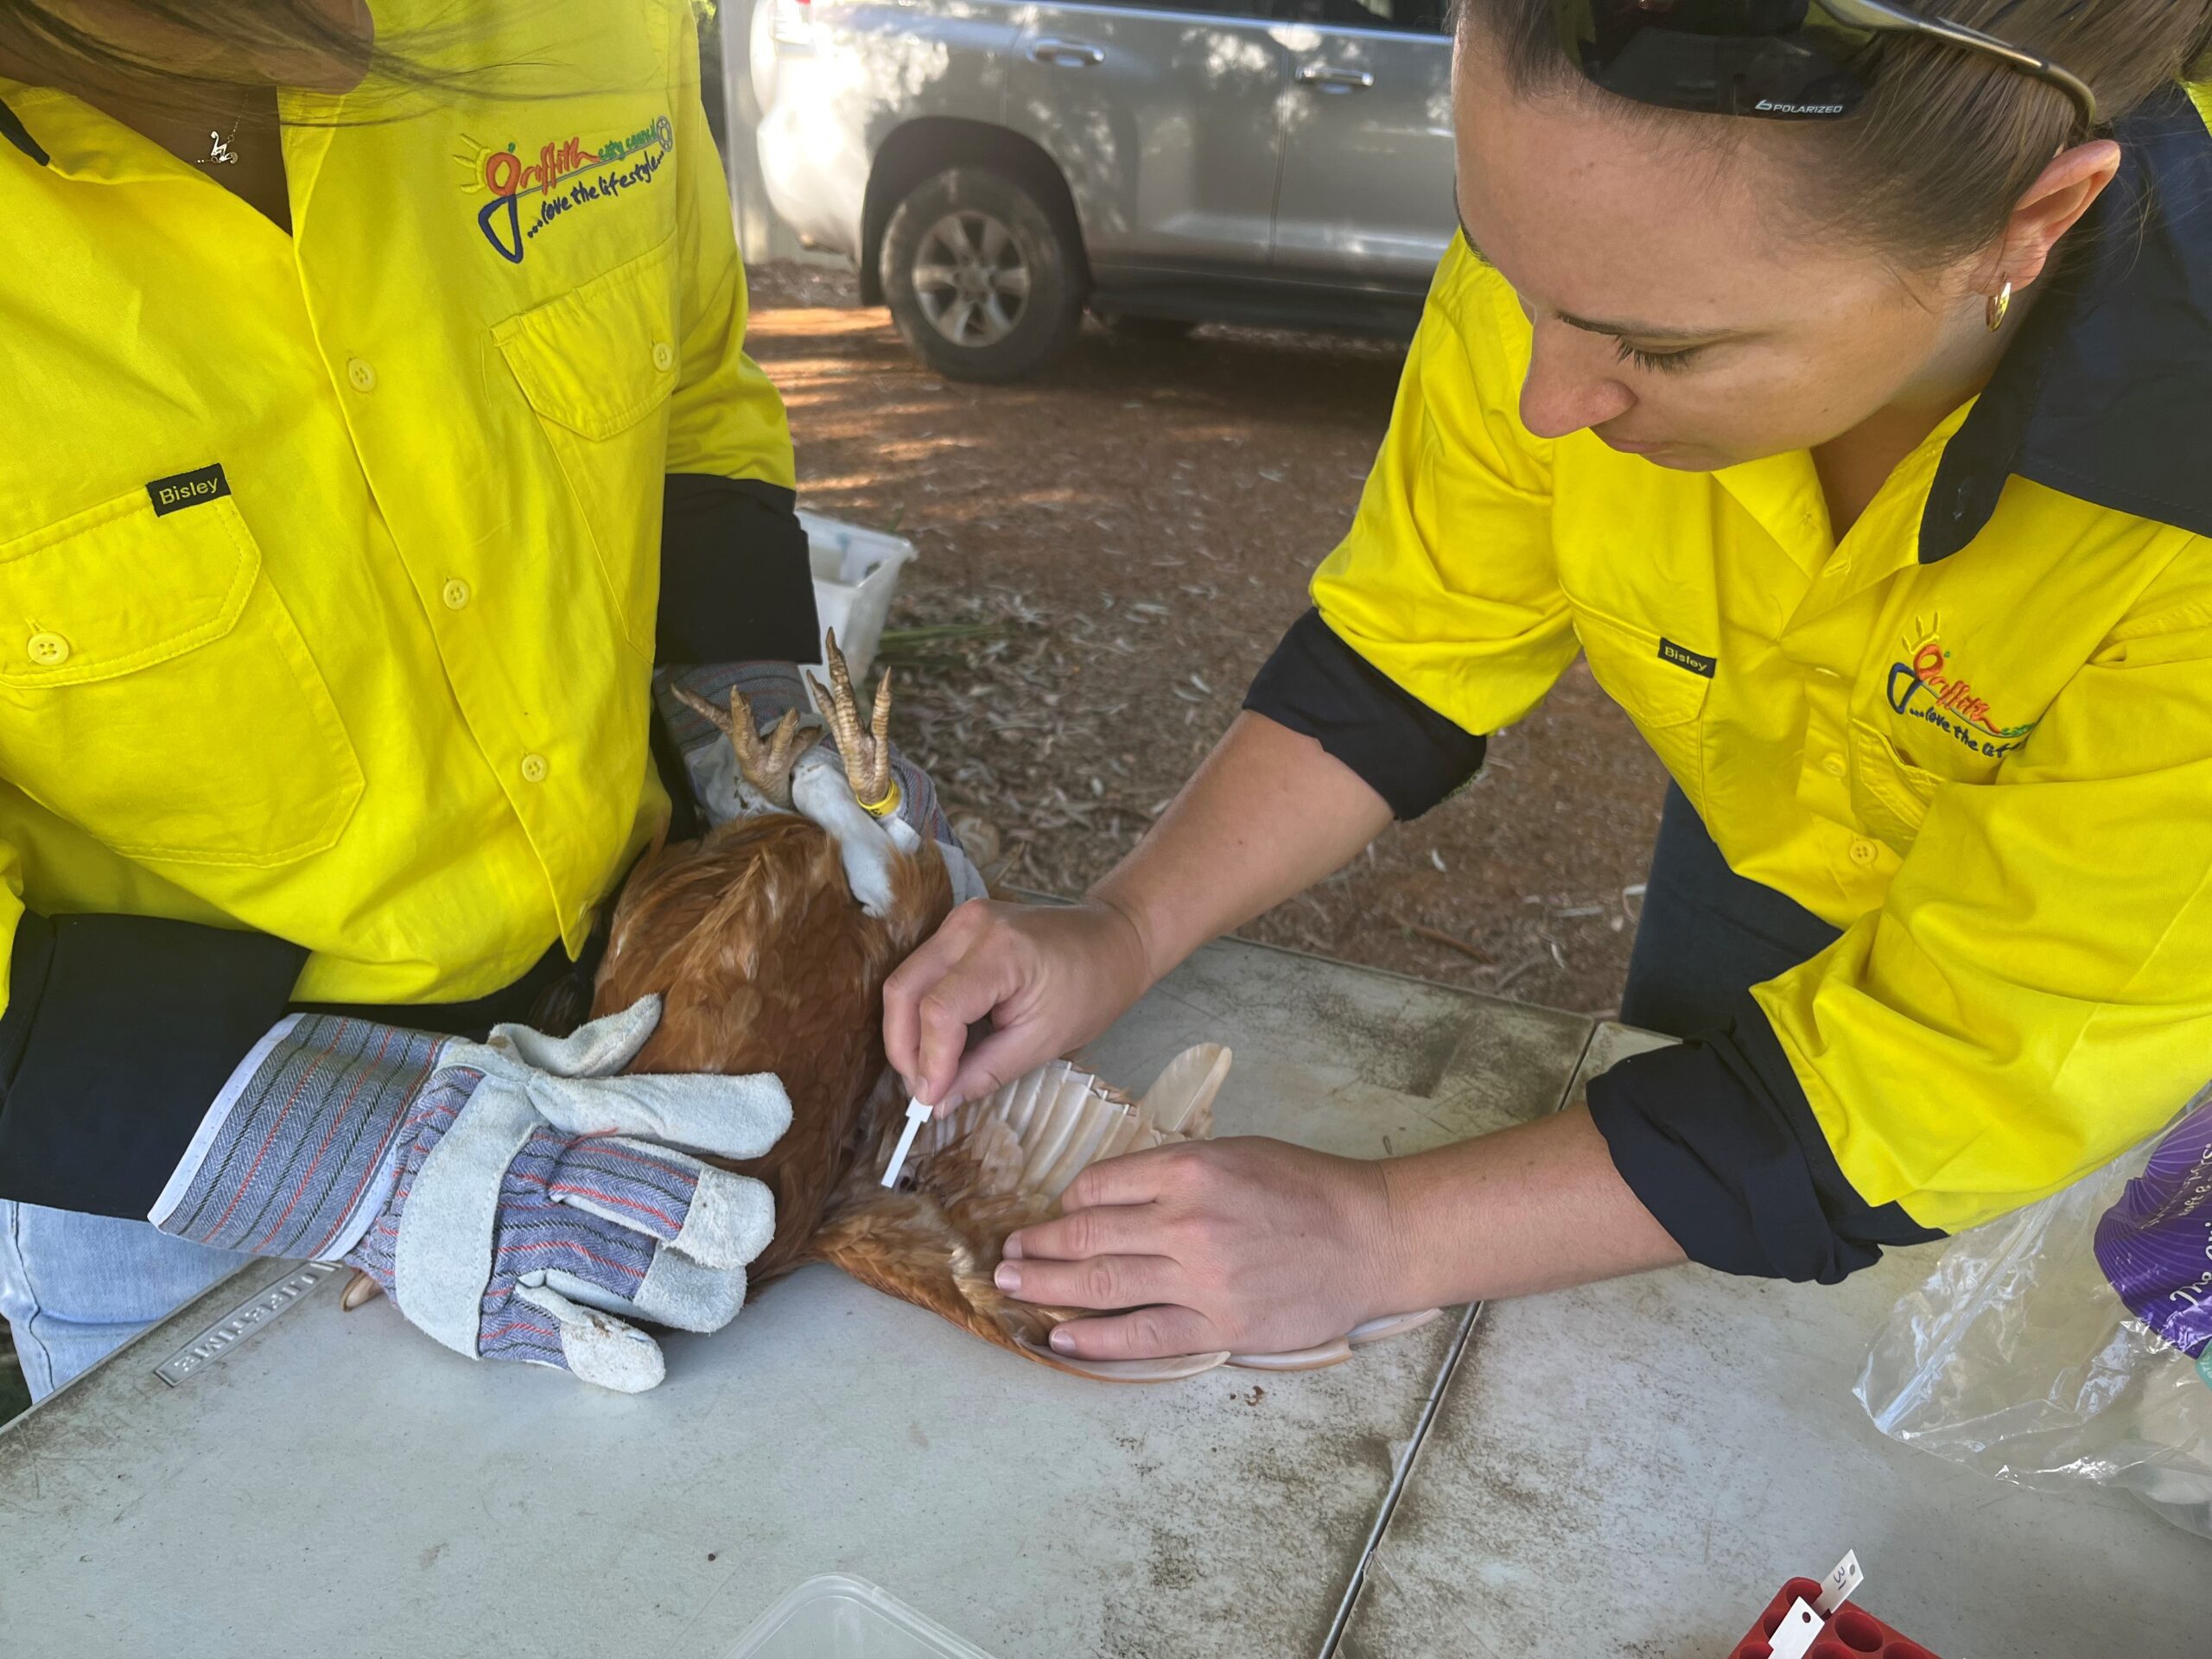 Two women in hi-vis shirts hold a chicken on a table.